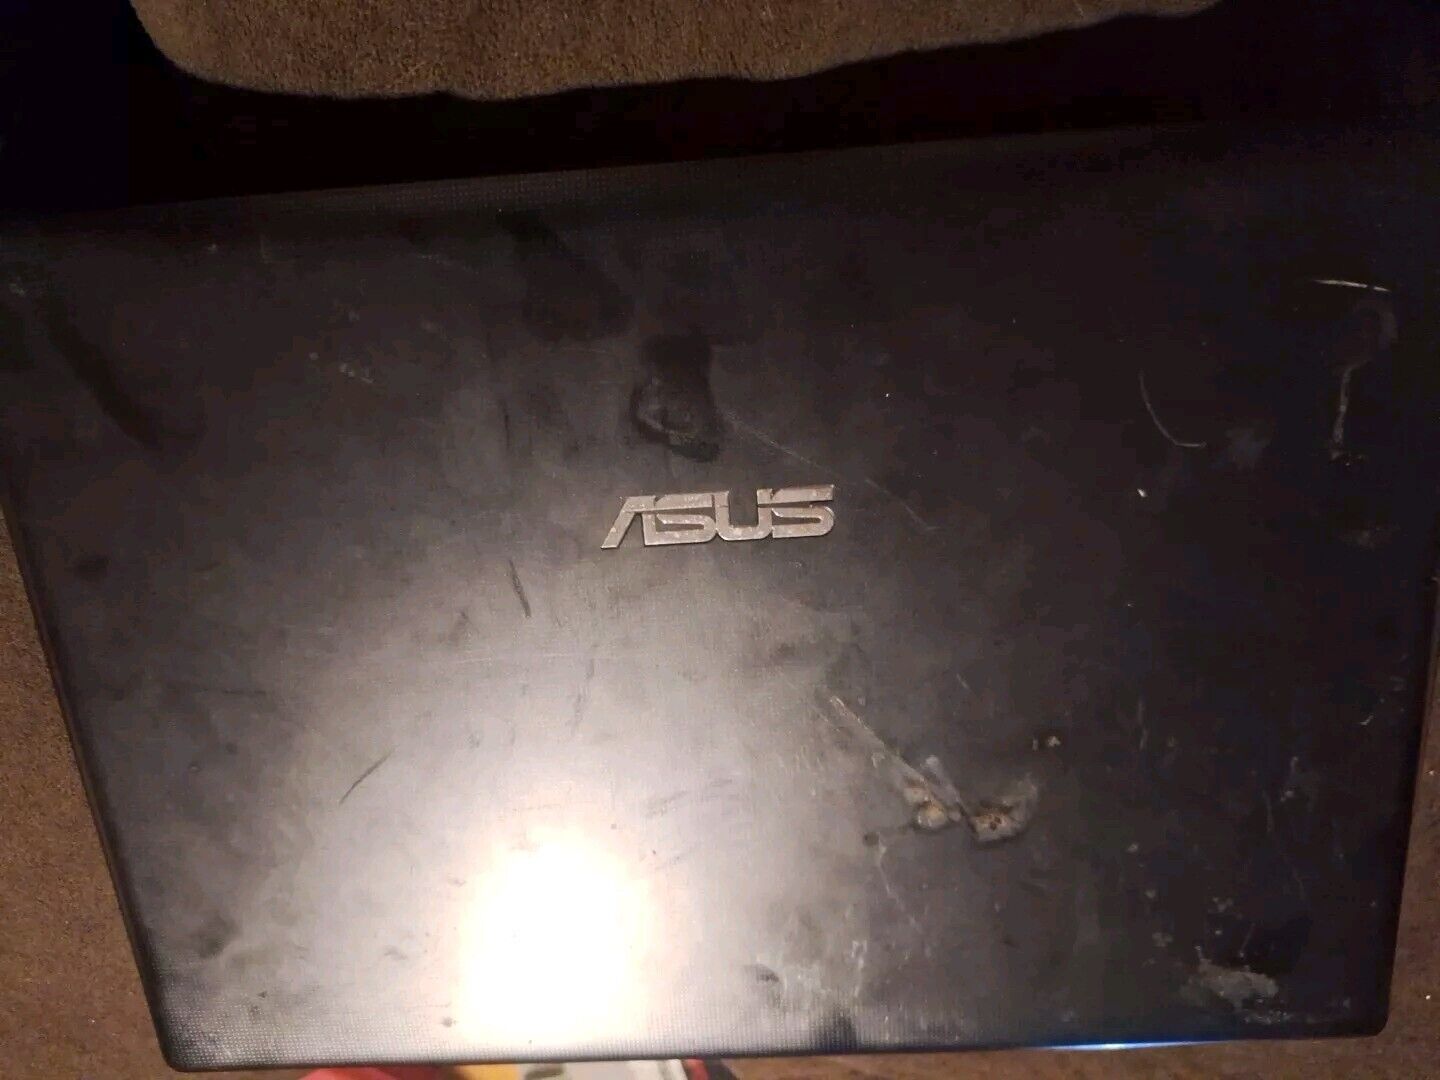 ASUS x401 Laptop - X401U-EBL4/X401A1-BCL0705 - 4gb RAM - UNTESTED - NO CHARGER